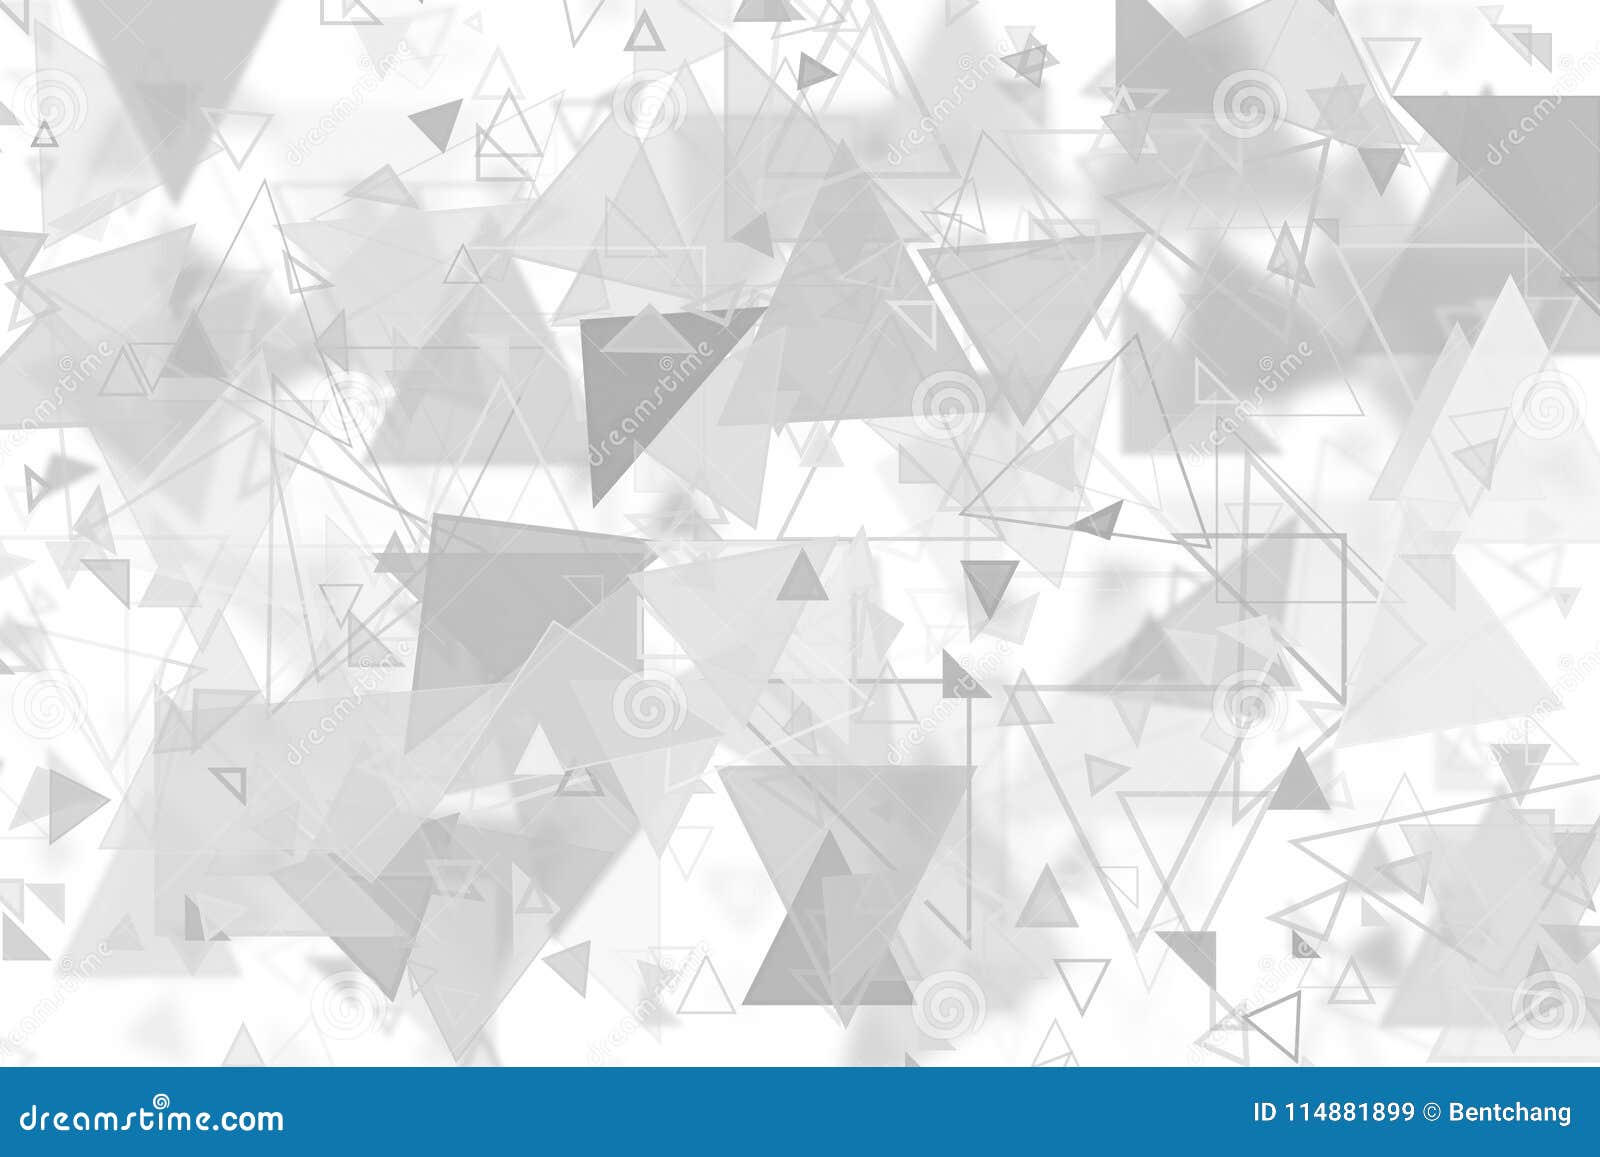 Black & White Backgroud with Gray Random Shapes, for Graphic Design ...